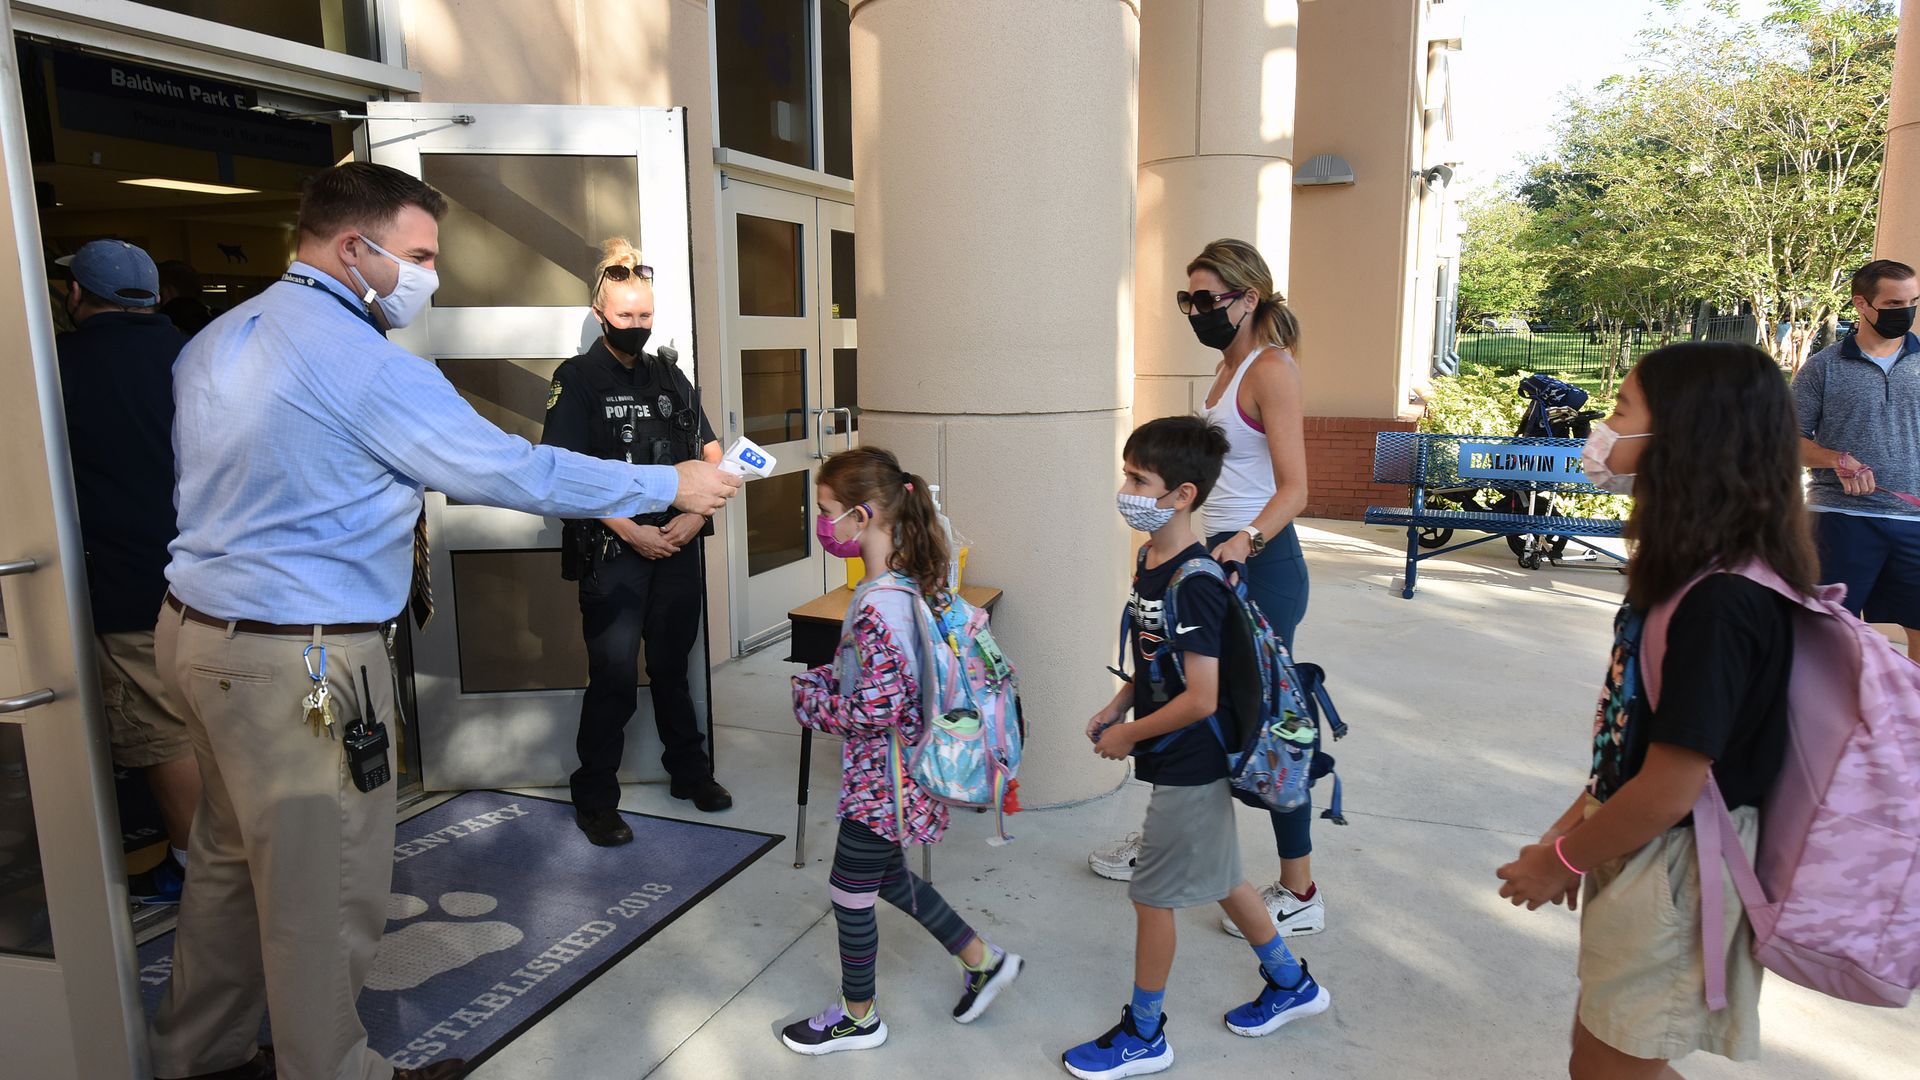 Principal Nathan Hay performs temperature checks on students as they arrive on the first day of classes for the 2021-22 school year at Baldwin Park Elementary School.